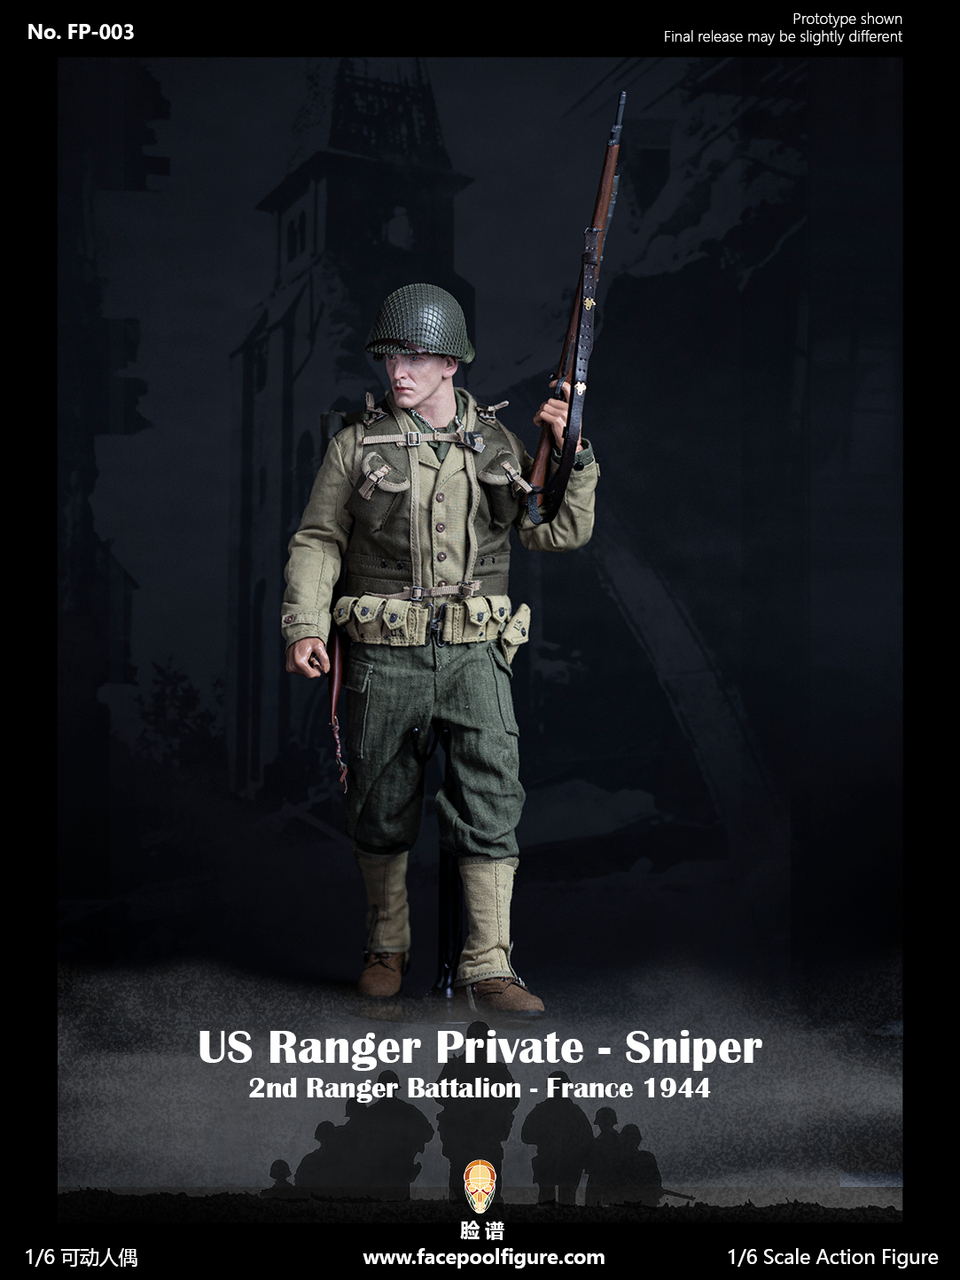 Details about   Facepoolfigure FP003A 1/6 WWII US Ranger Private Sniper Figure Toy Standard Ver. 